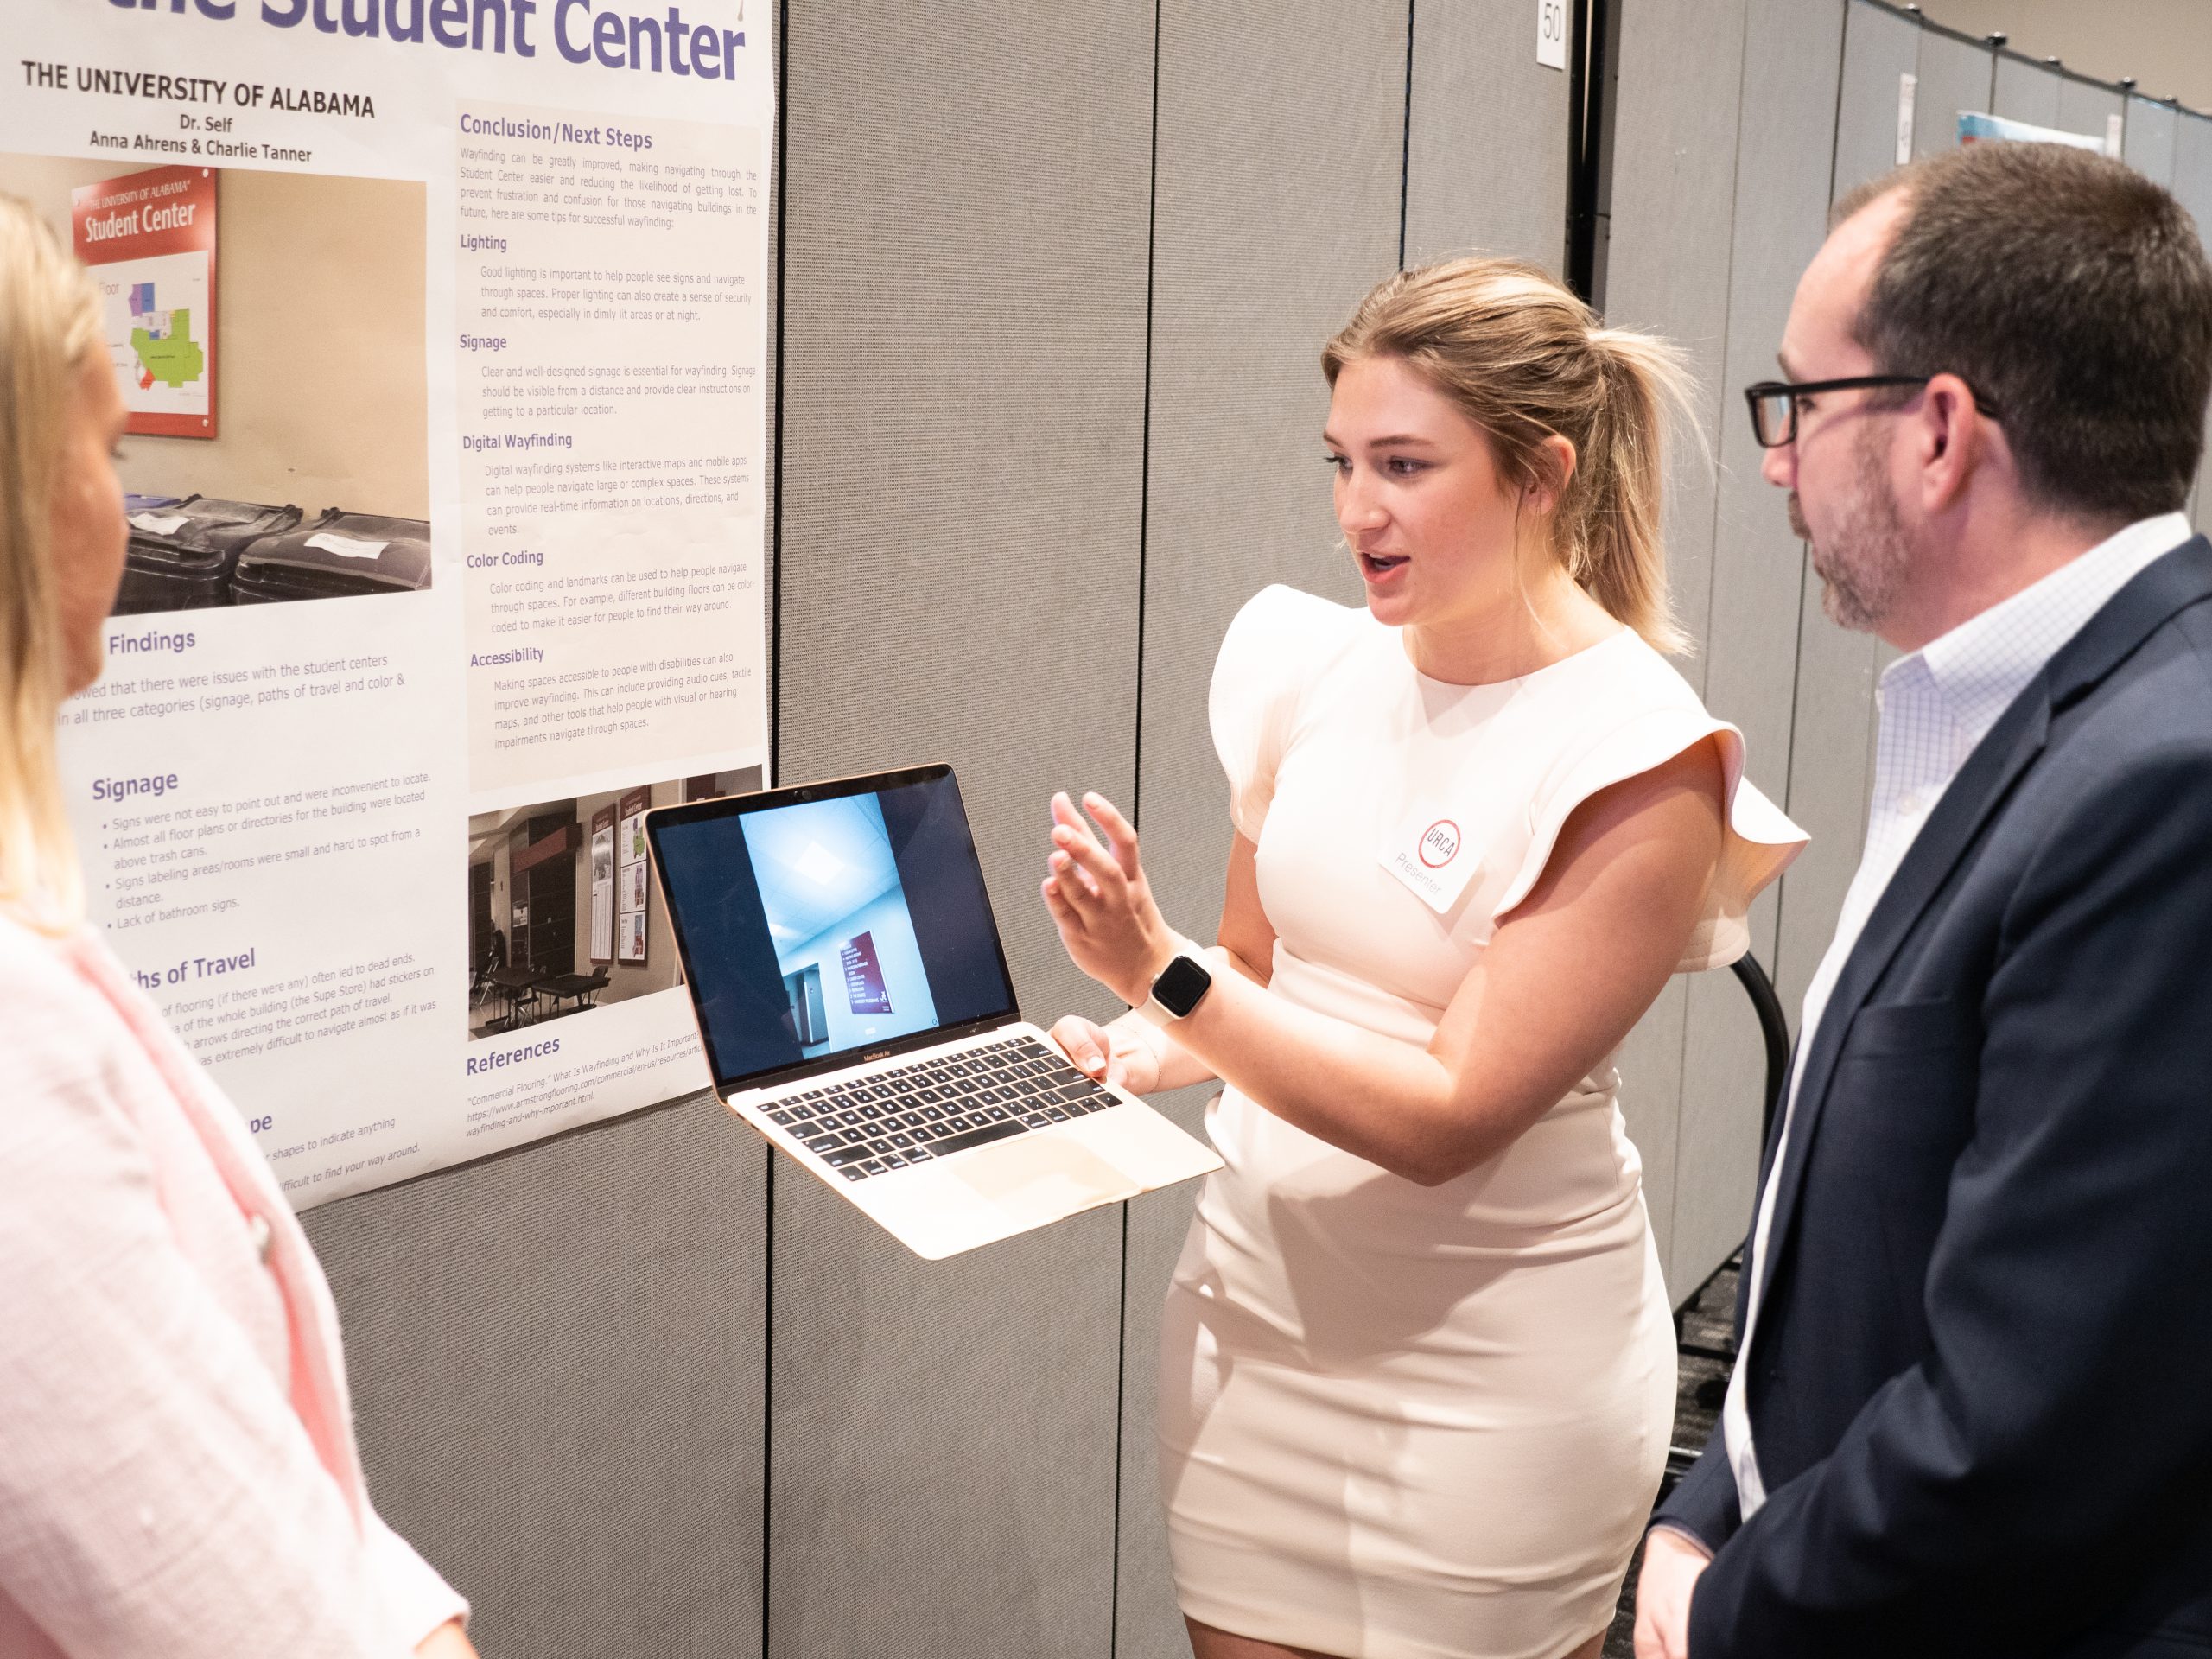 Student with laptop explains her research to the dean